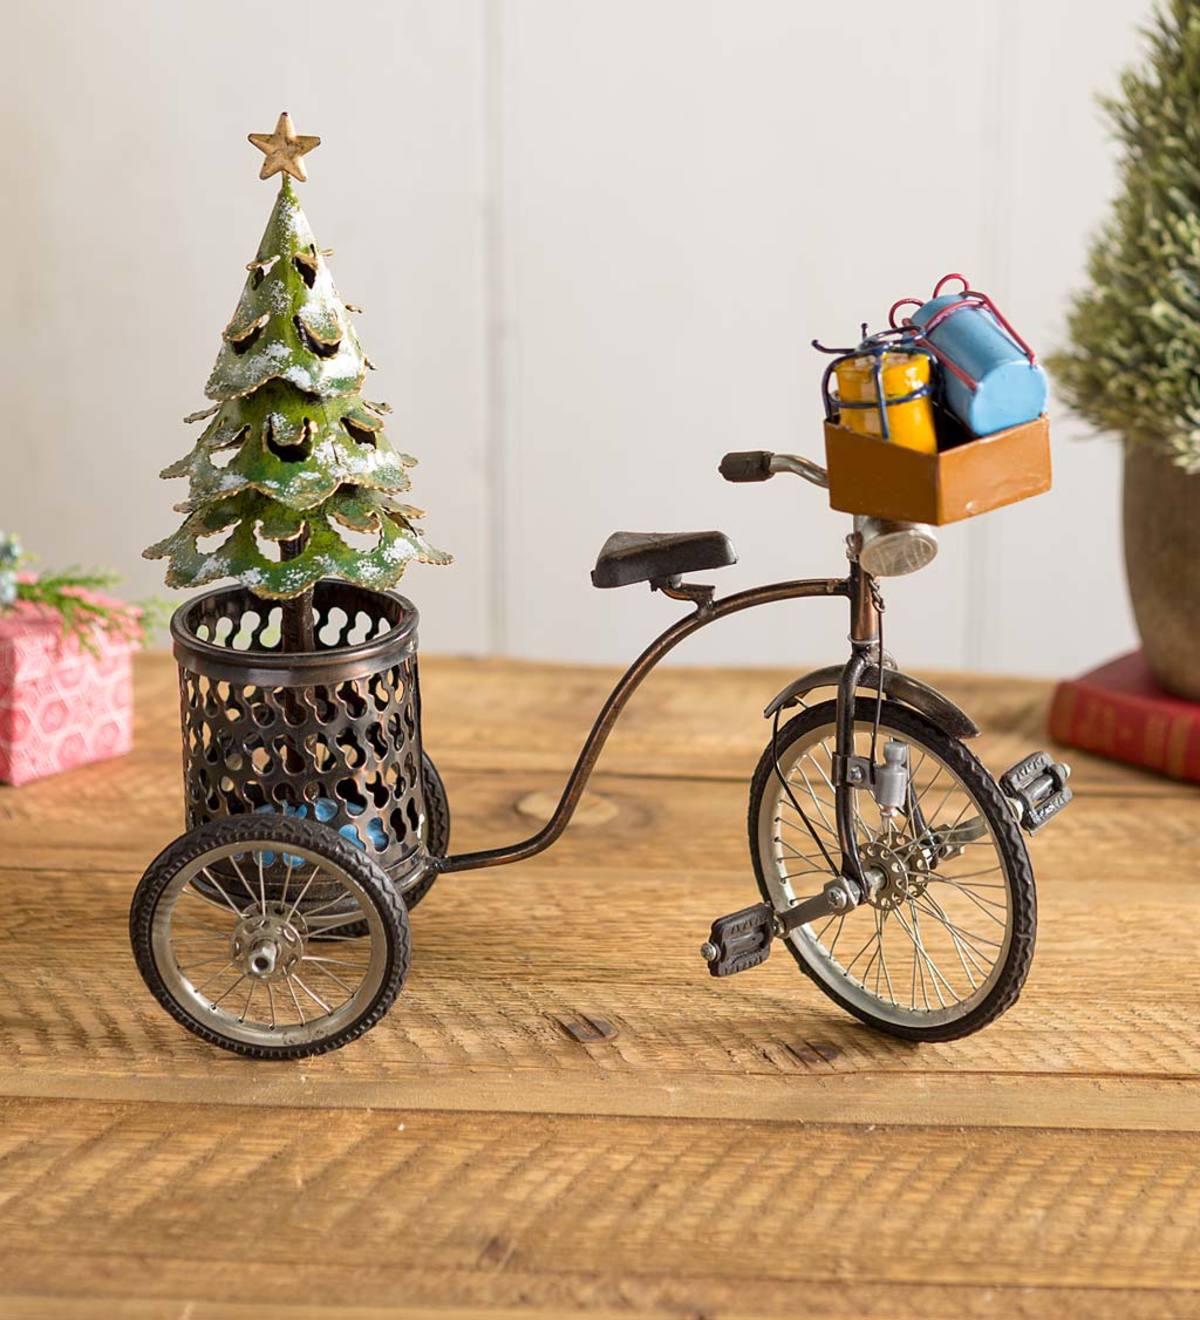 Miniature Holiday Tricycle with Christmas Tree